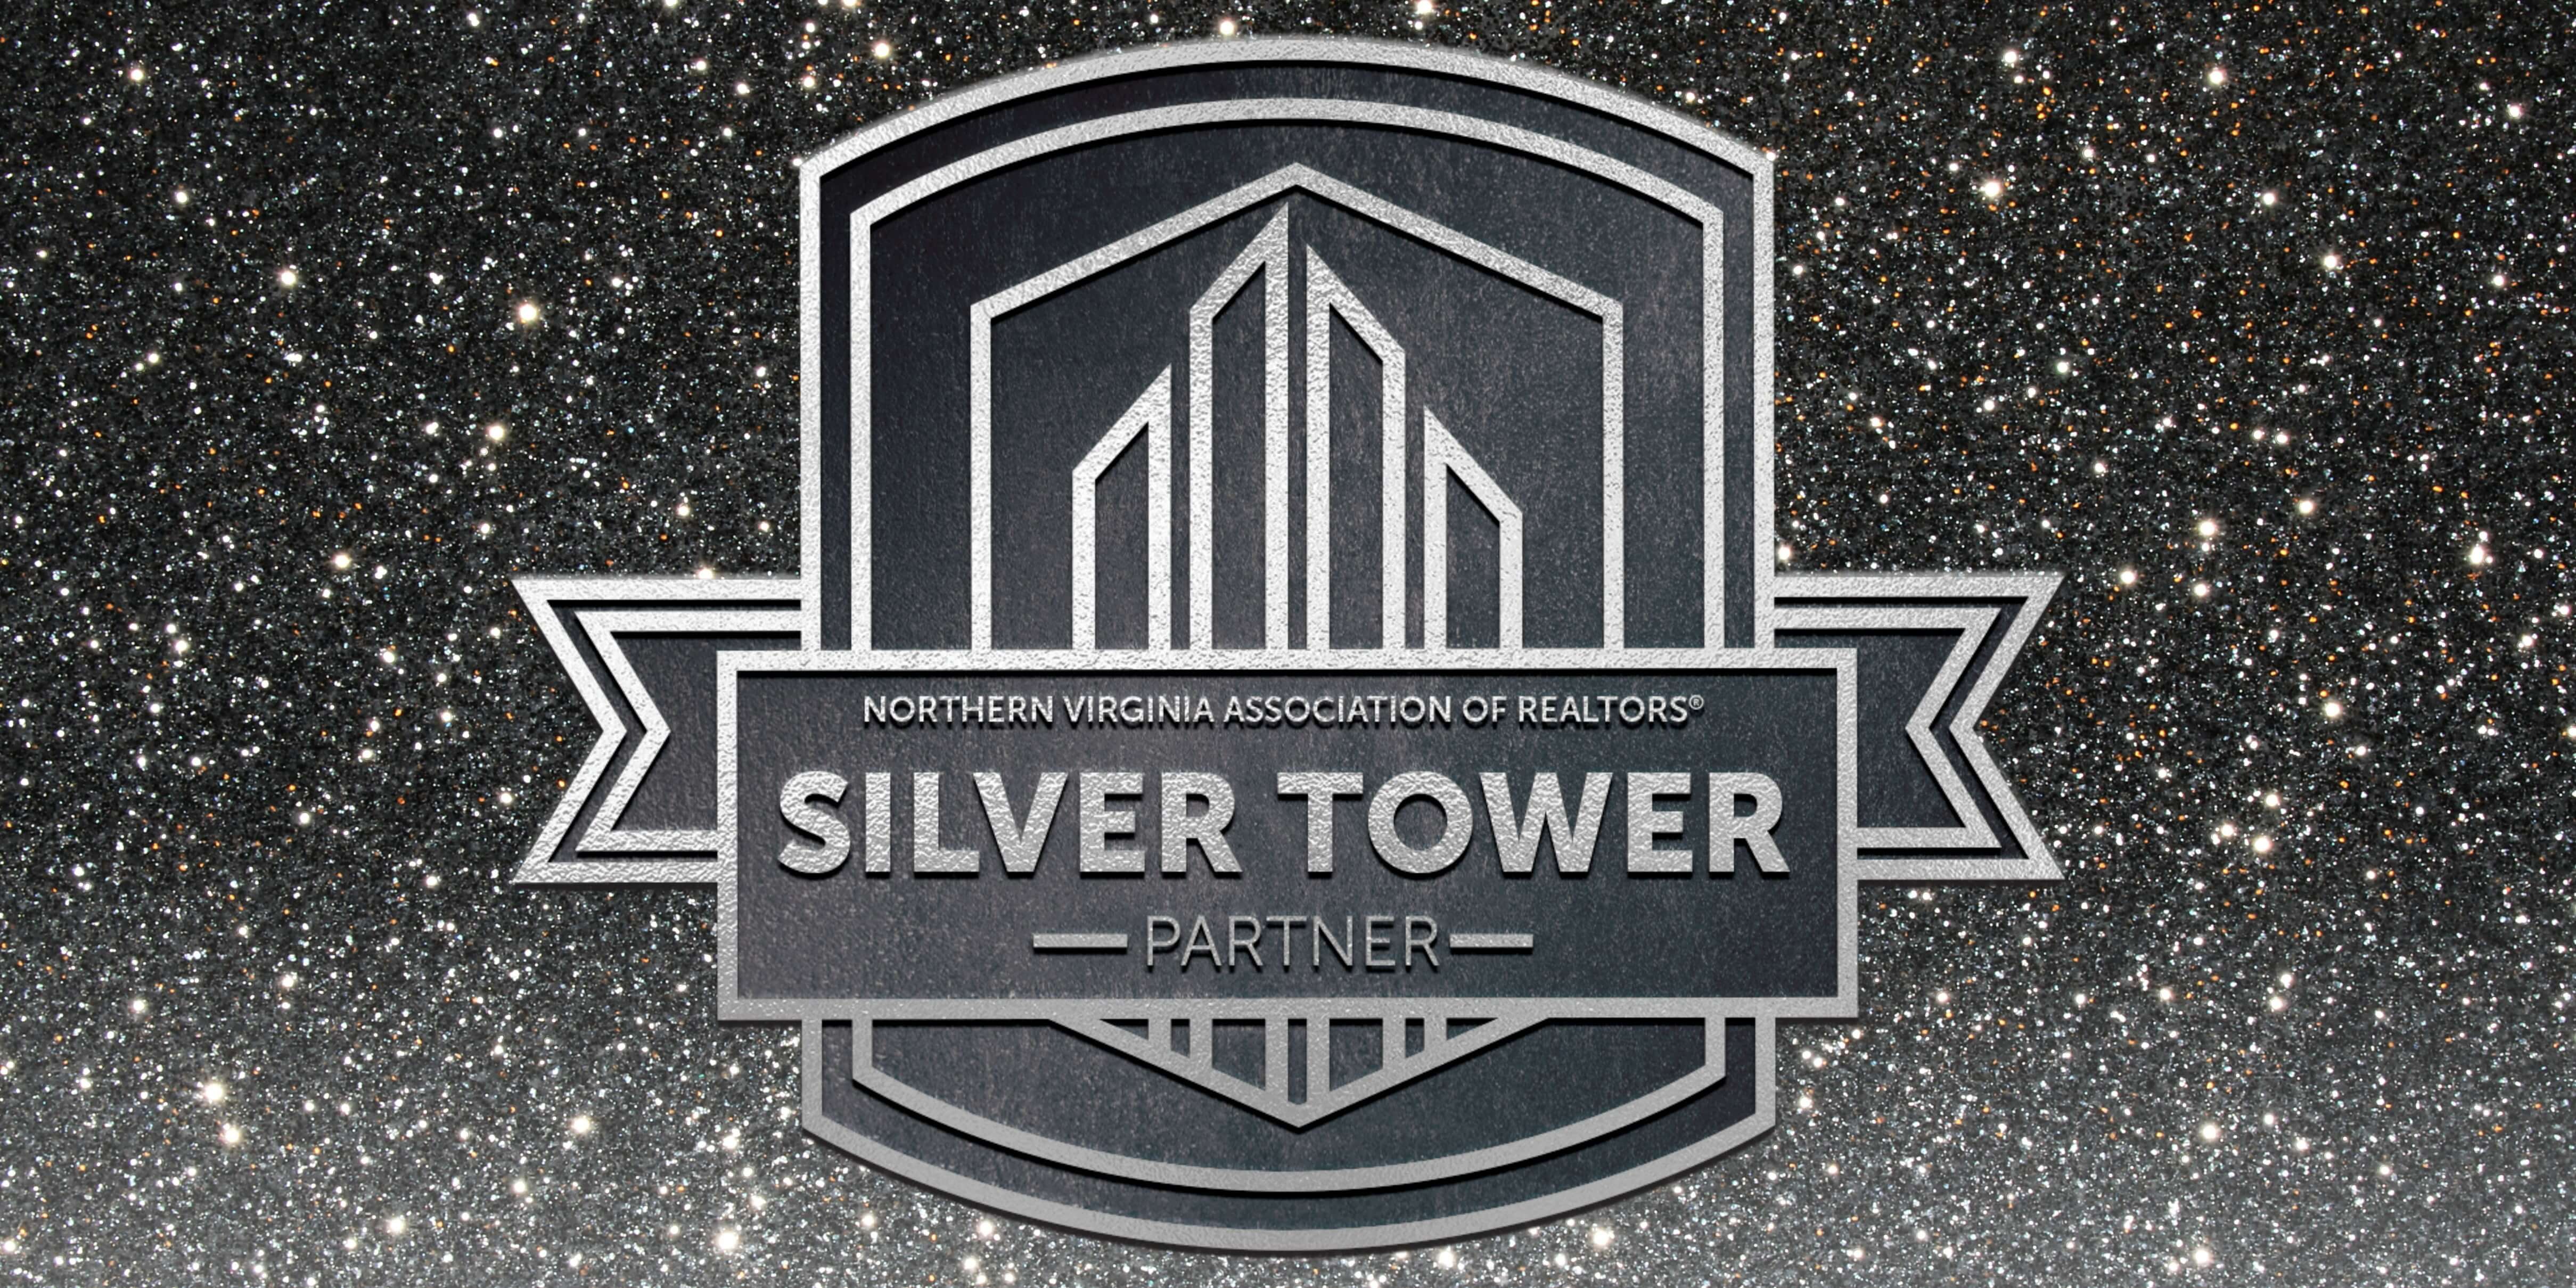 silver tower 22